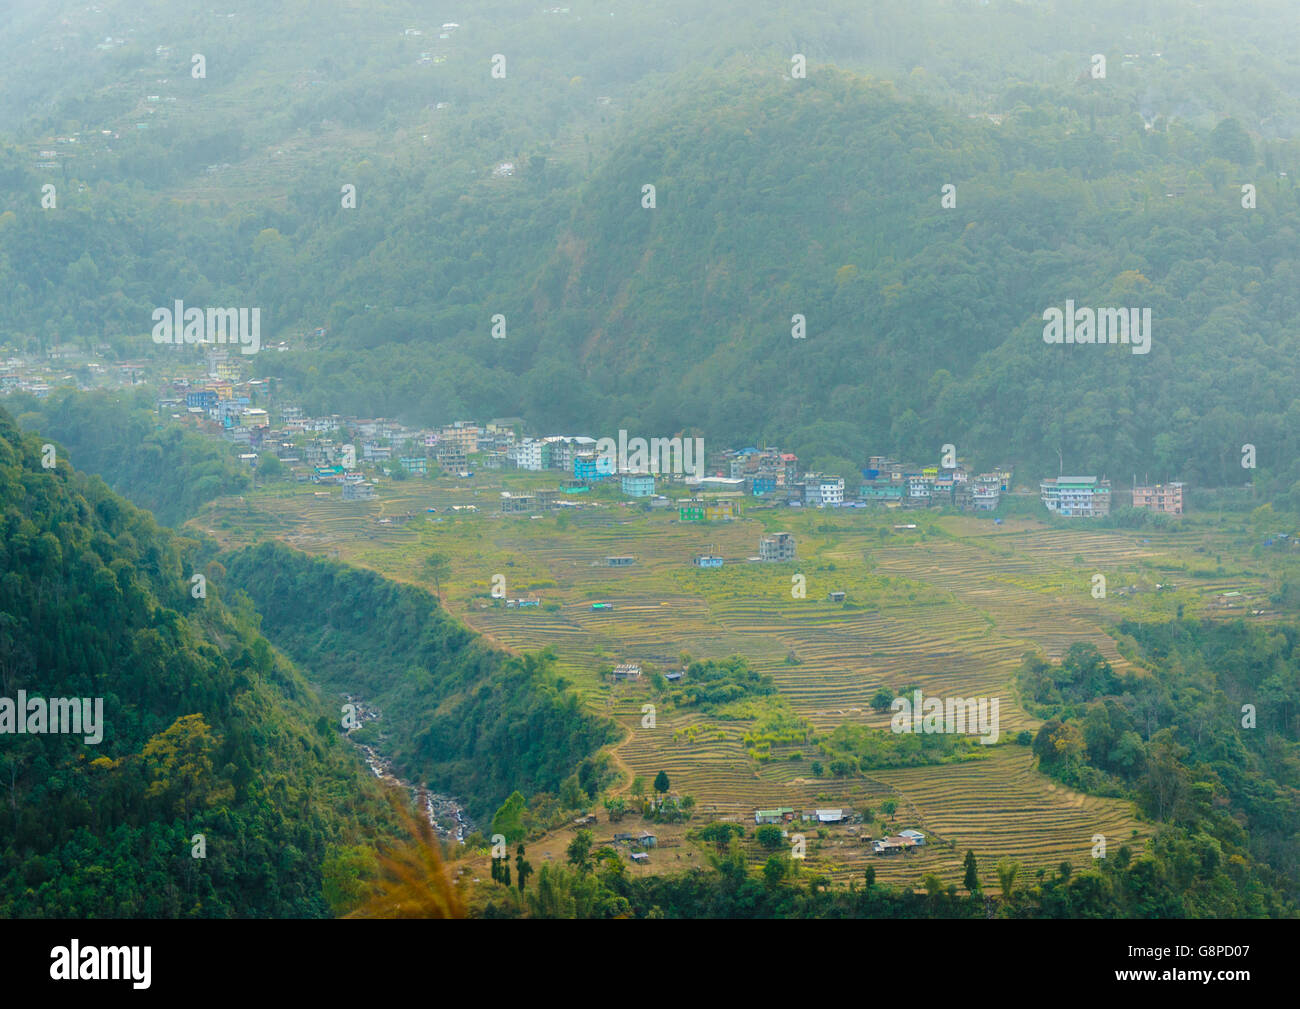 Piece of land looking like 'Map of India' in Sikkim, India. Stock Photo